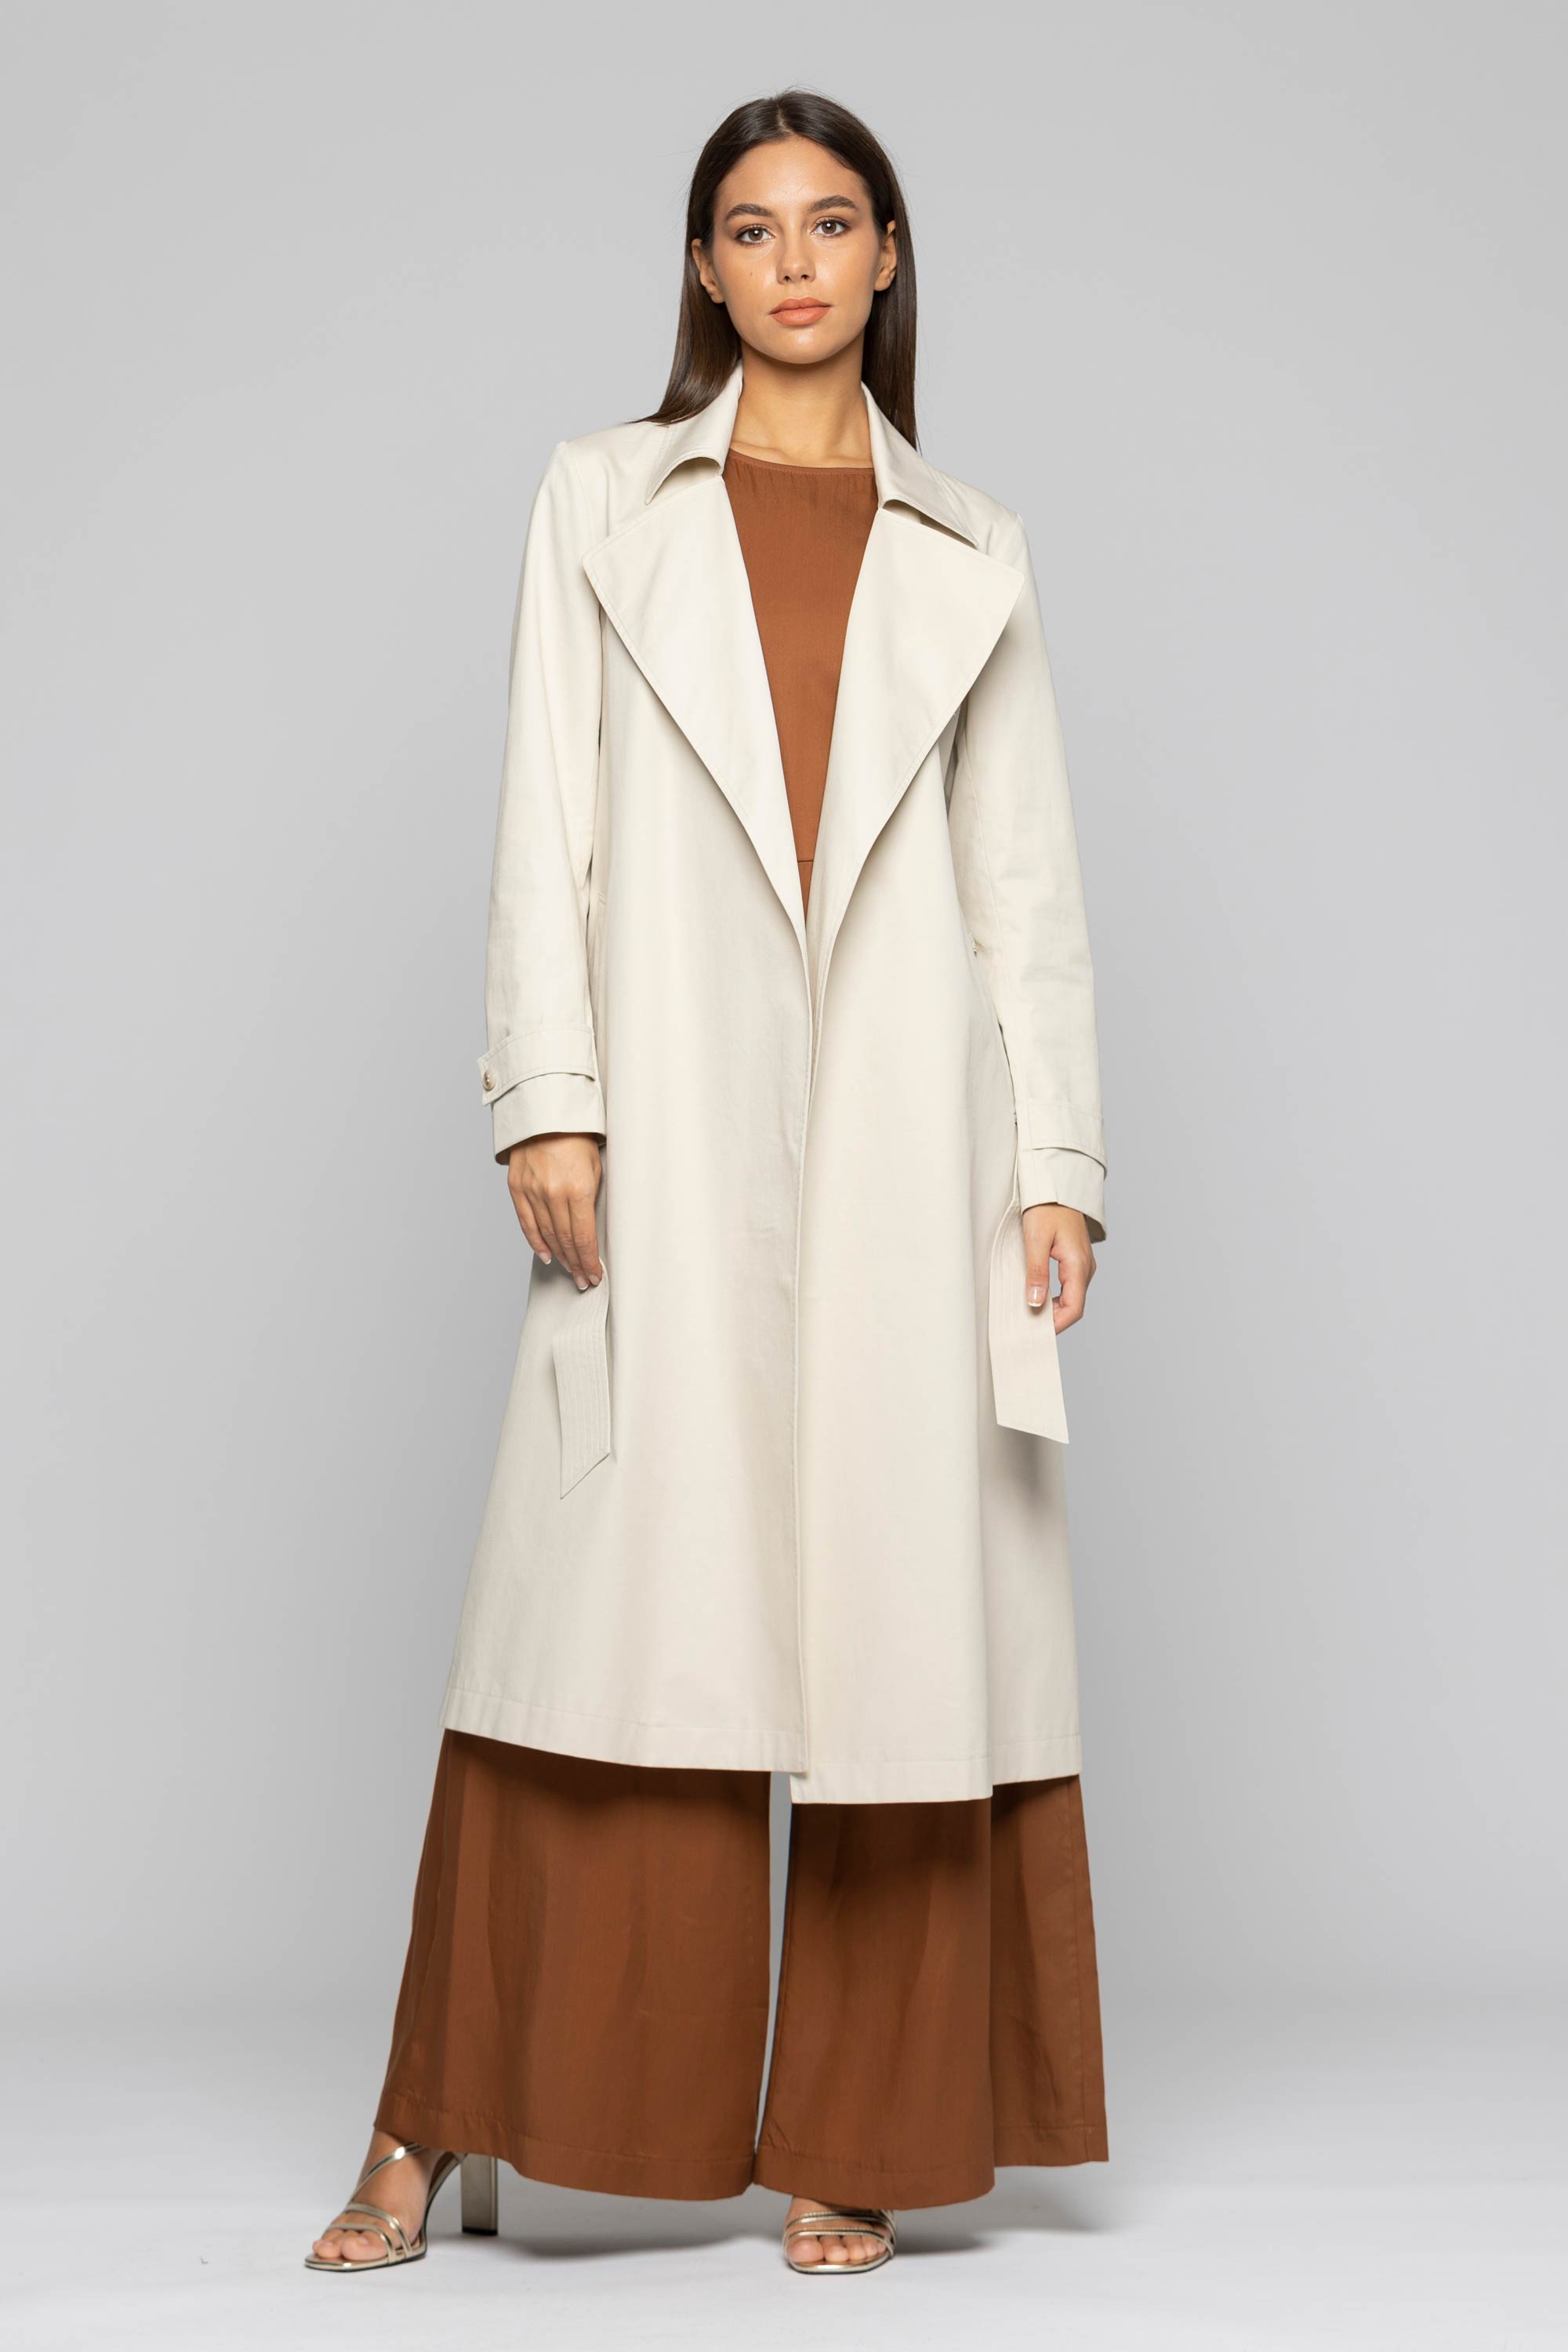 Long trench coat with a belt and pockets - Trench MOERETH, by Kocca